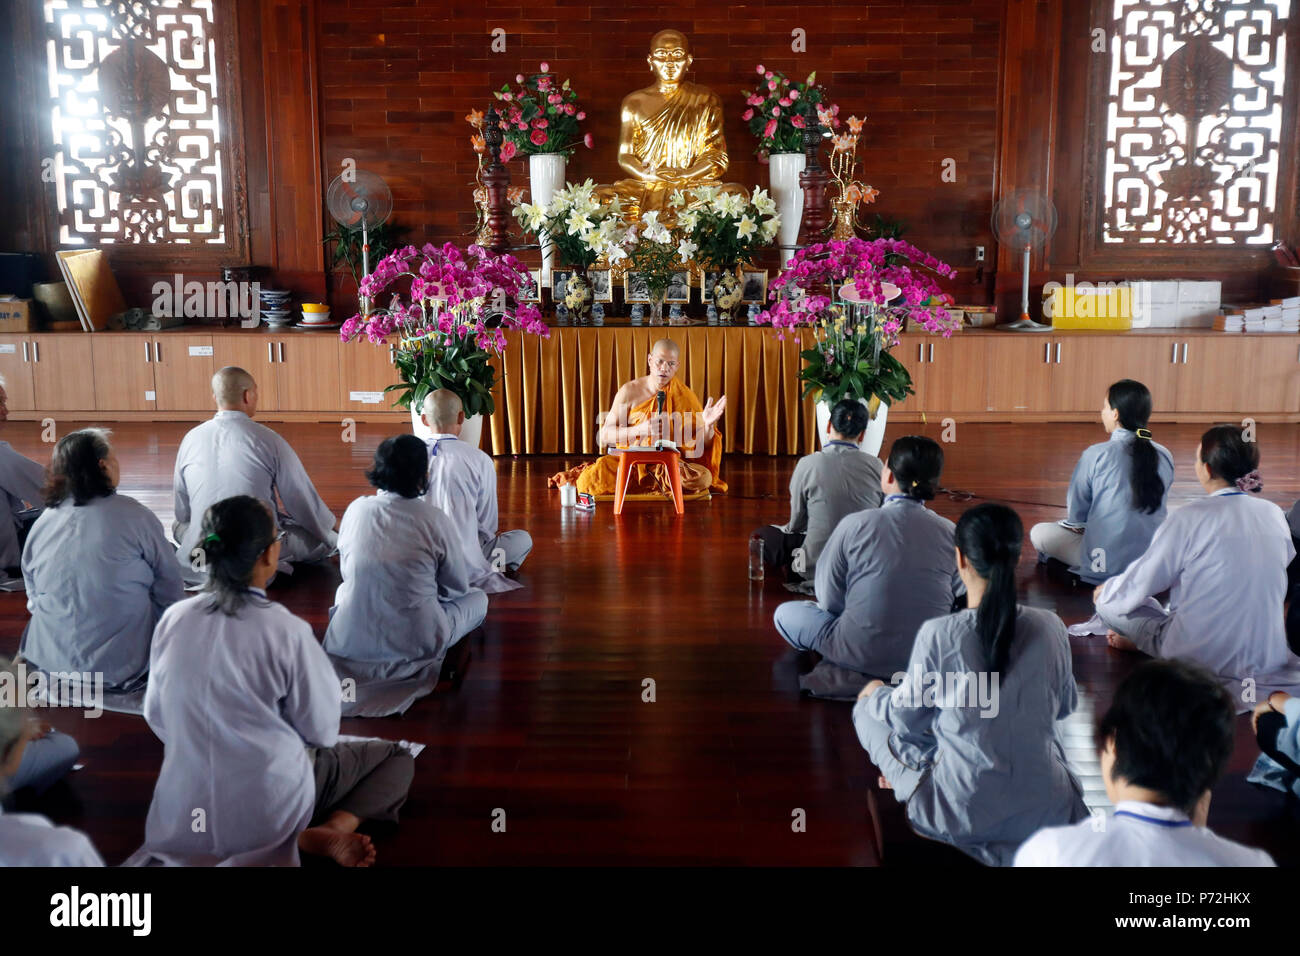 A teacher instructs a group of people how to recite Buddhist chants, Minh Dang Quang Buddhist Temple, Ho Chi Minh City, Vietnam, Indochina, Asia Stock Photo